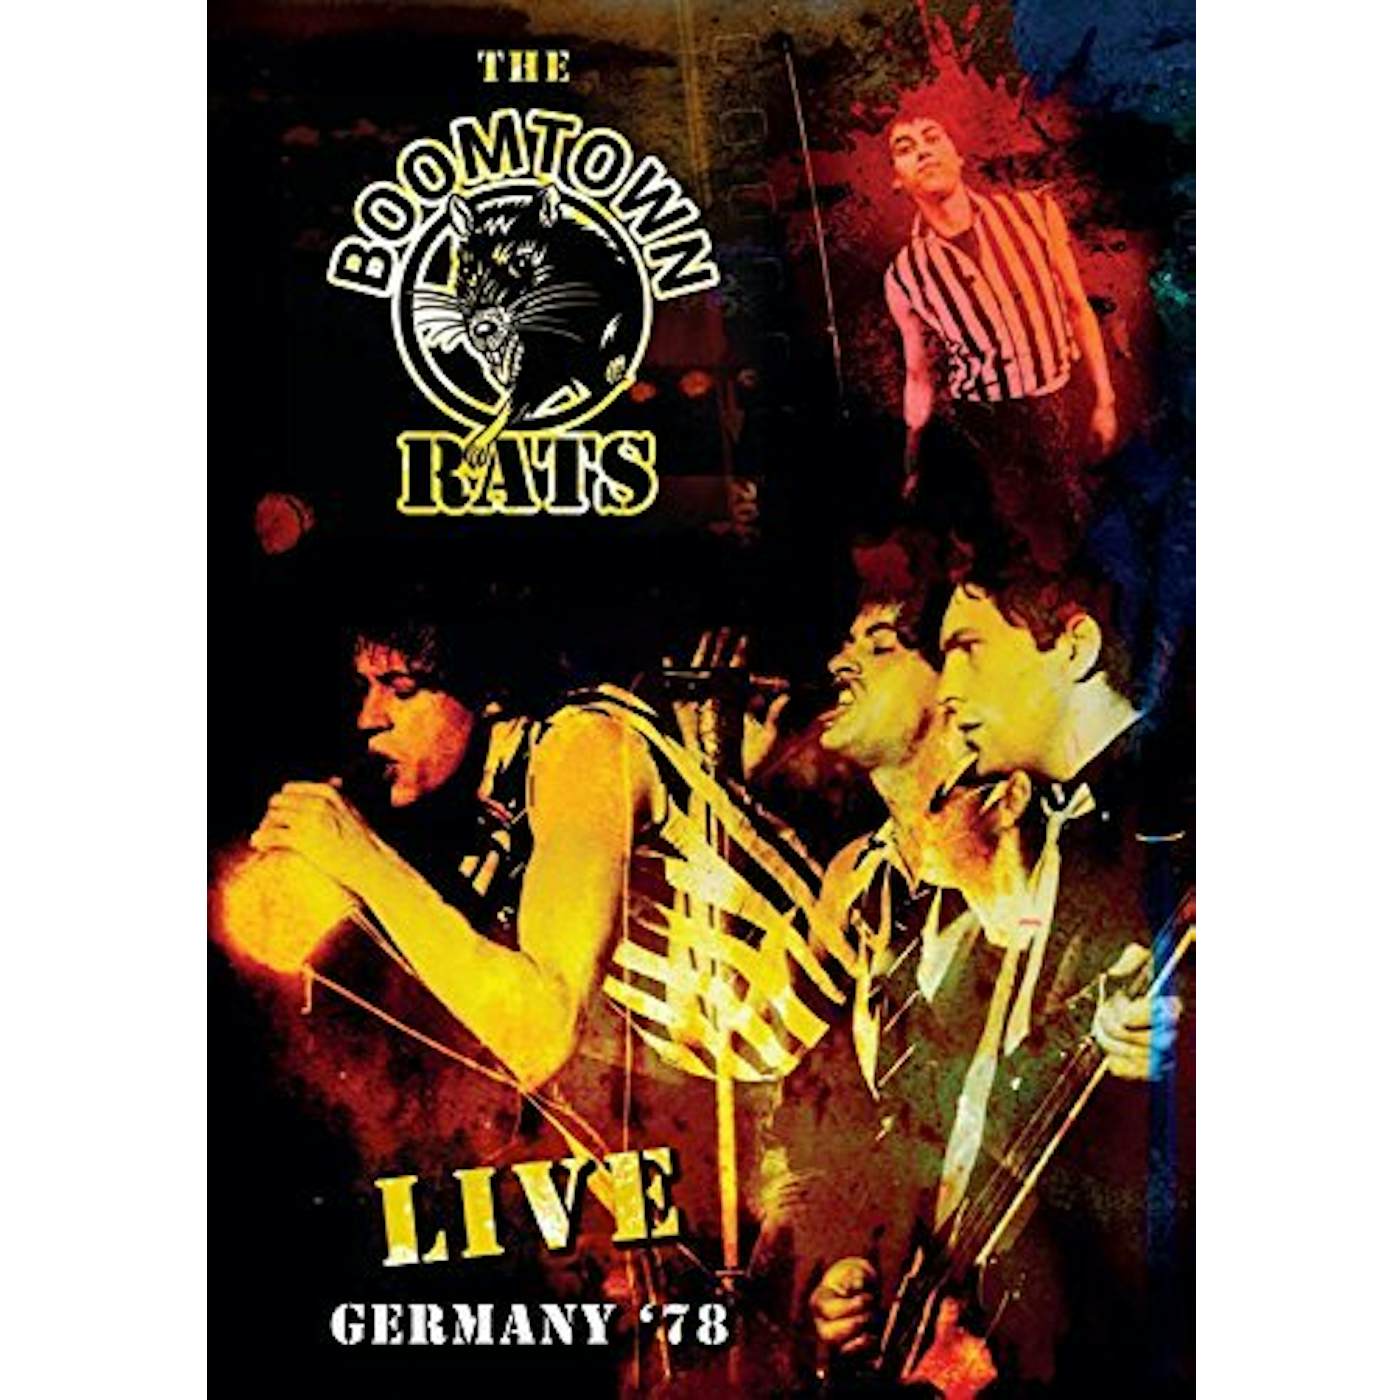 The Boomtown Rats LIVE GERMANY '78 DVD